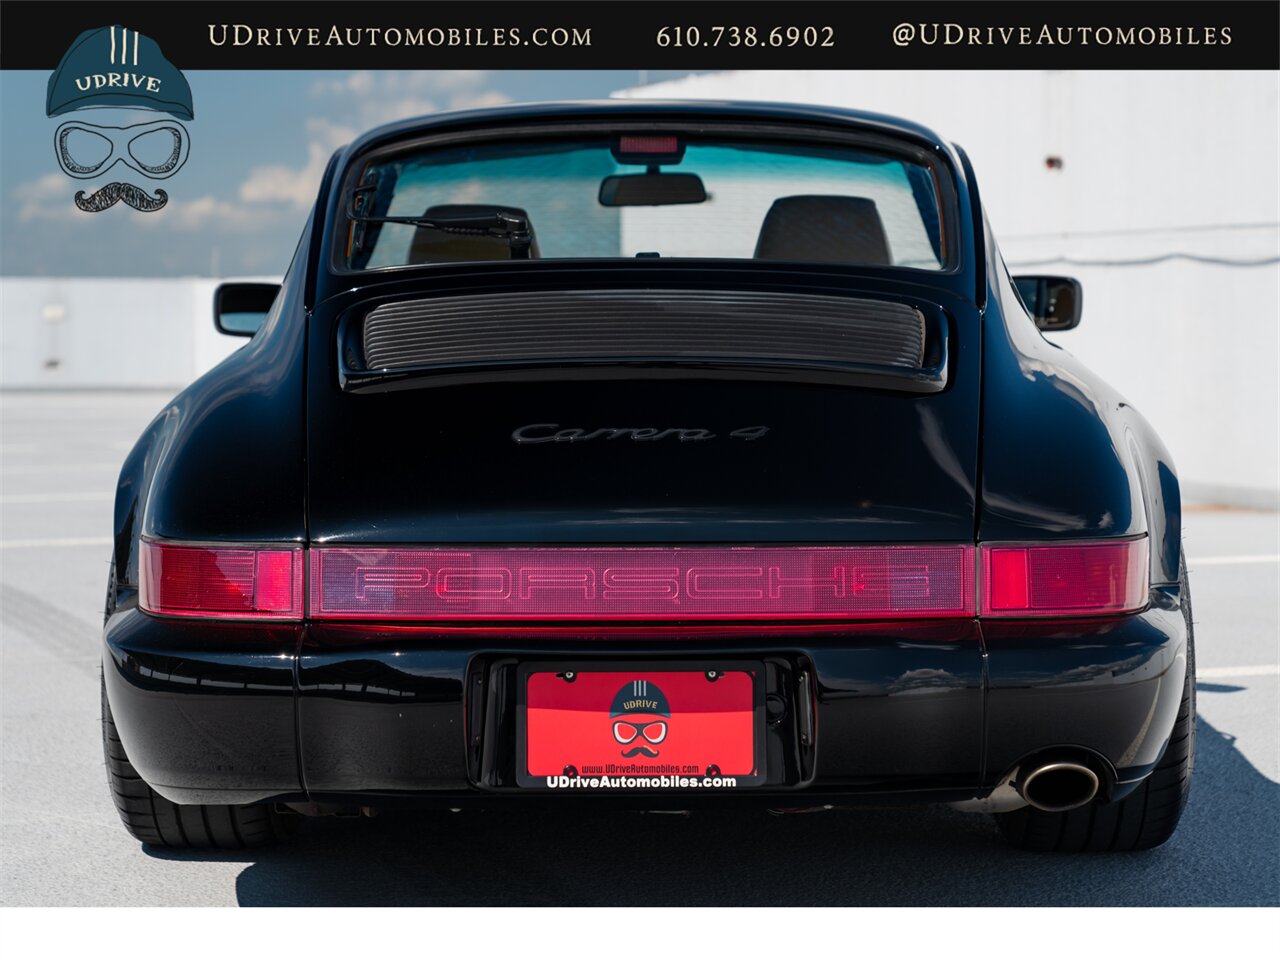 1989 Porsche 911 Carrera 4  964 C4 5 Speed Manual $63k Recent Service and Upgrades - Photo 25 - West Chester, PA 19382